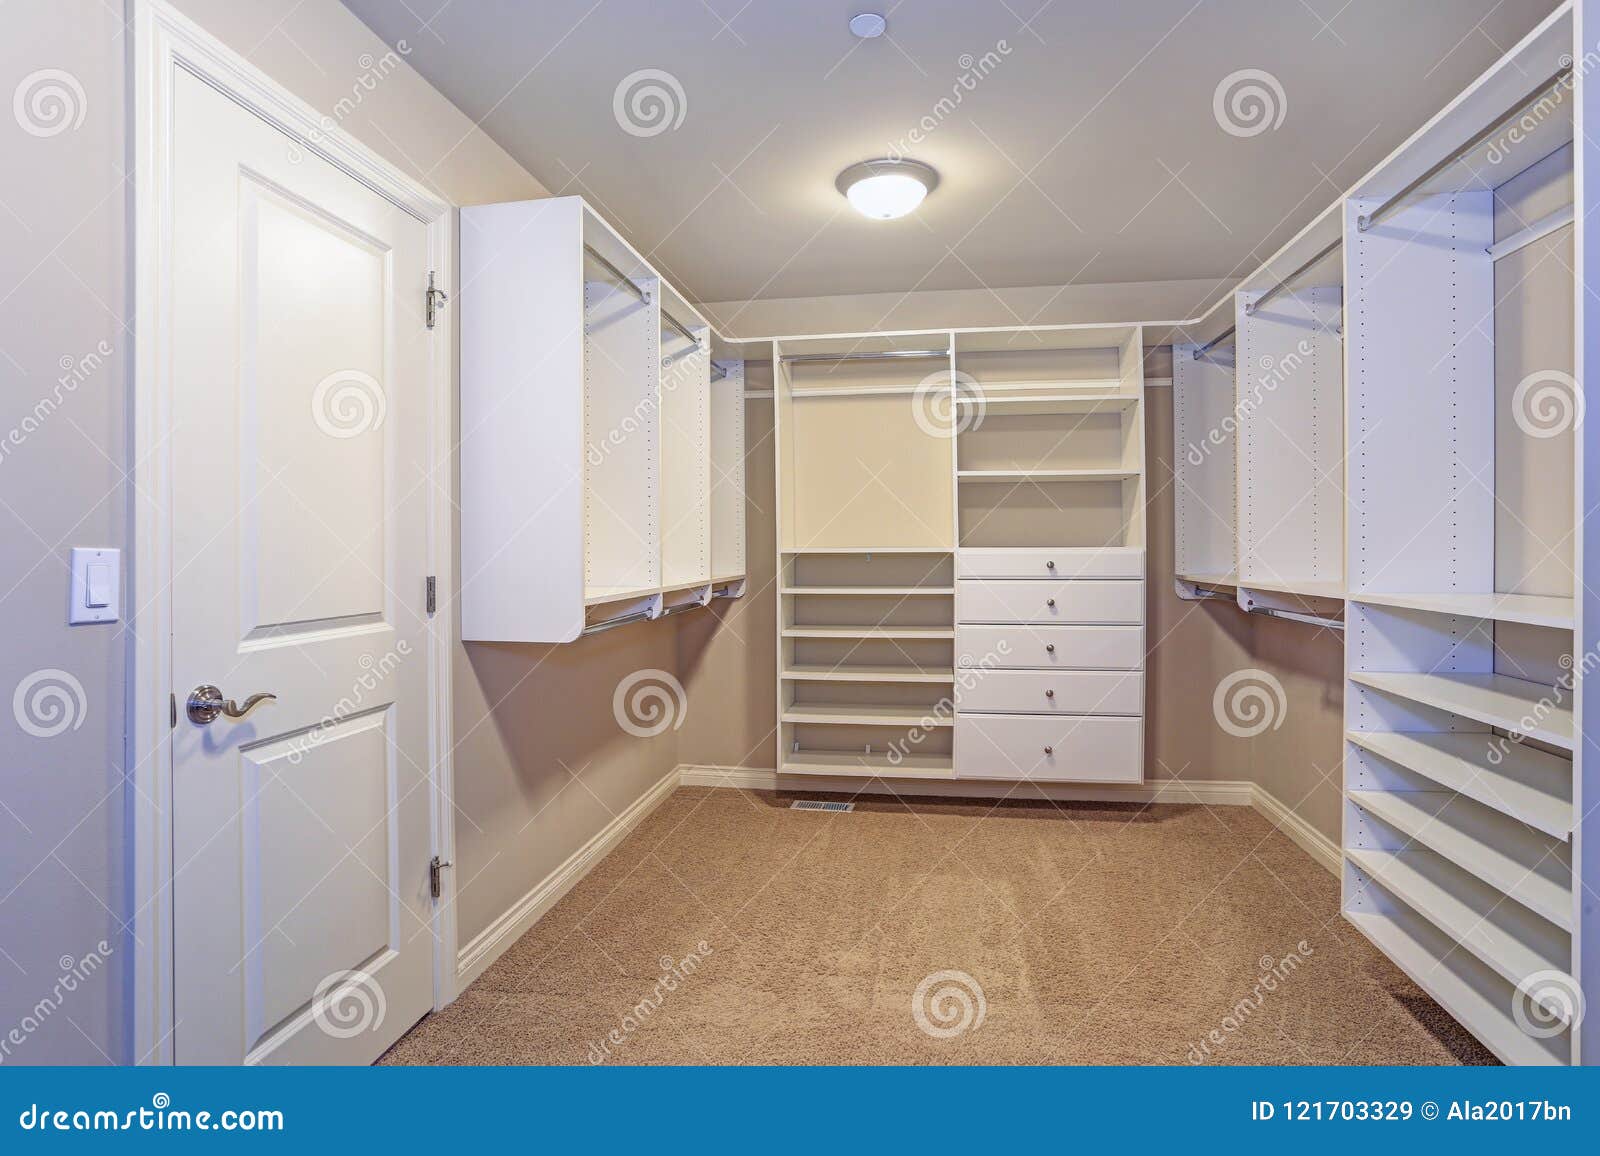 large walk-in closet with white shelves, drawers